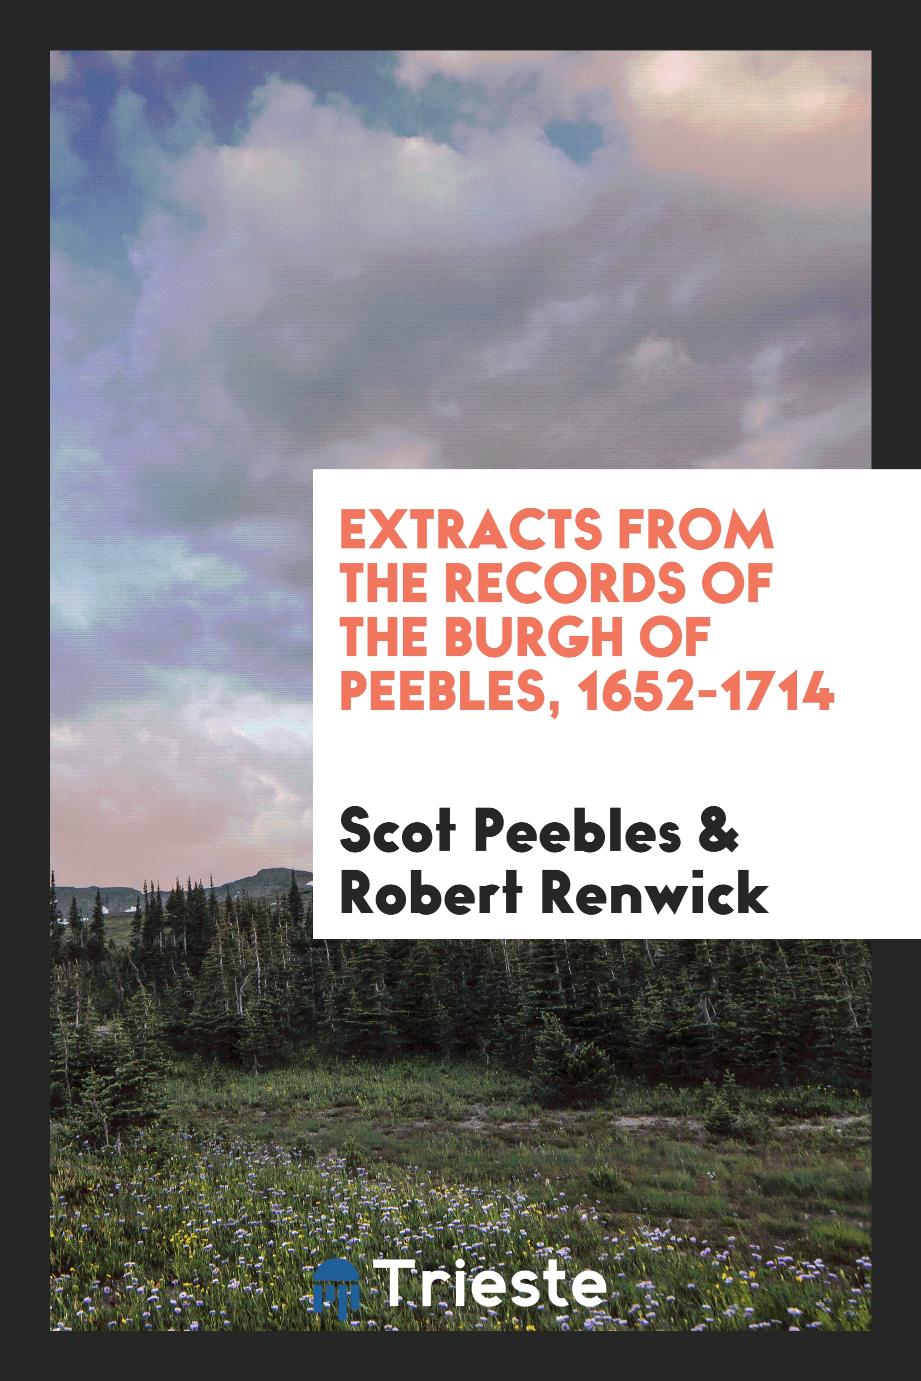 Extracts from the records of the burgh of Peebles, 1652-1714